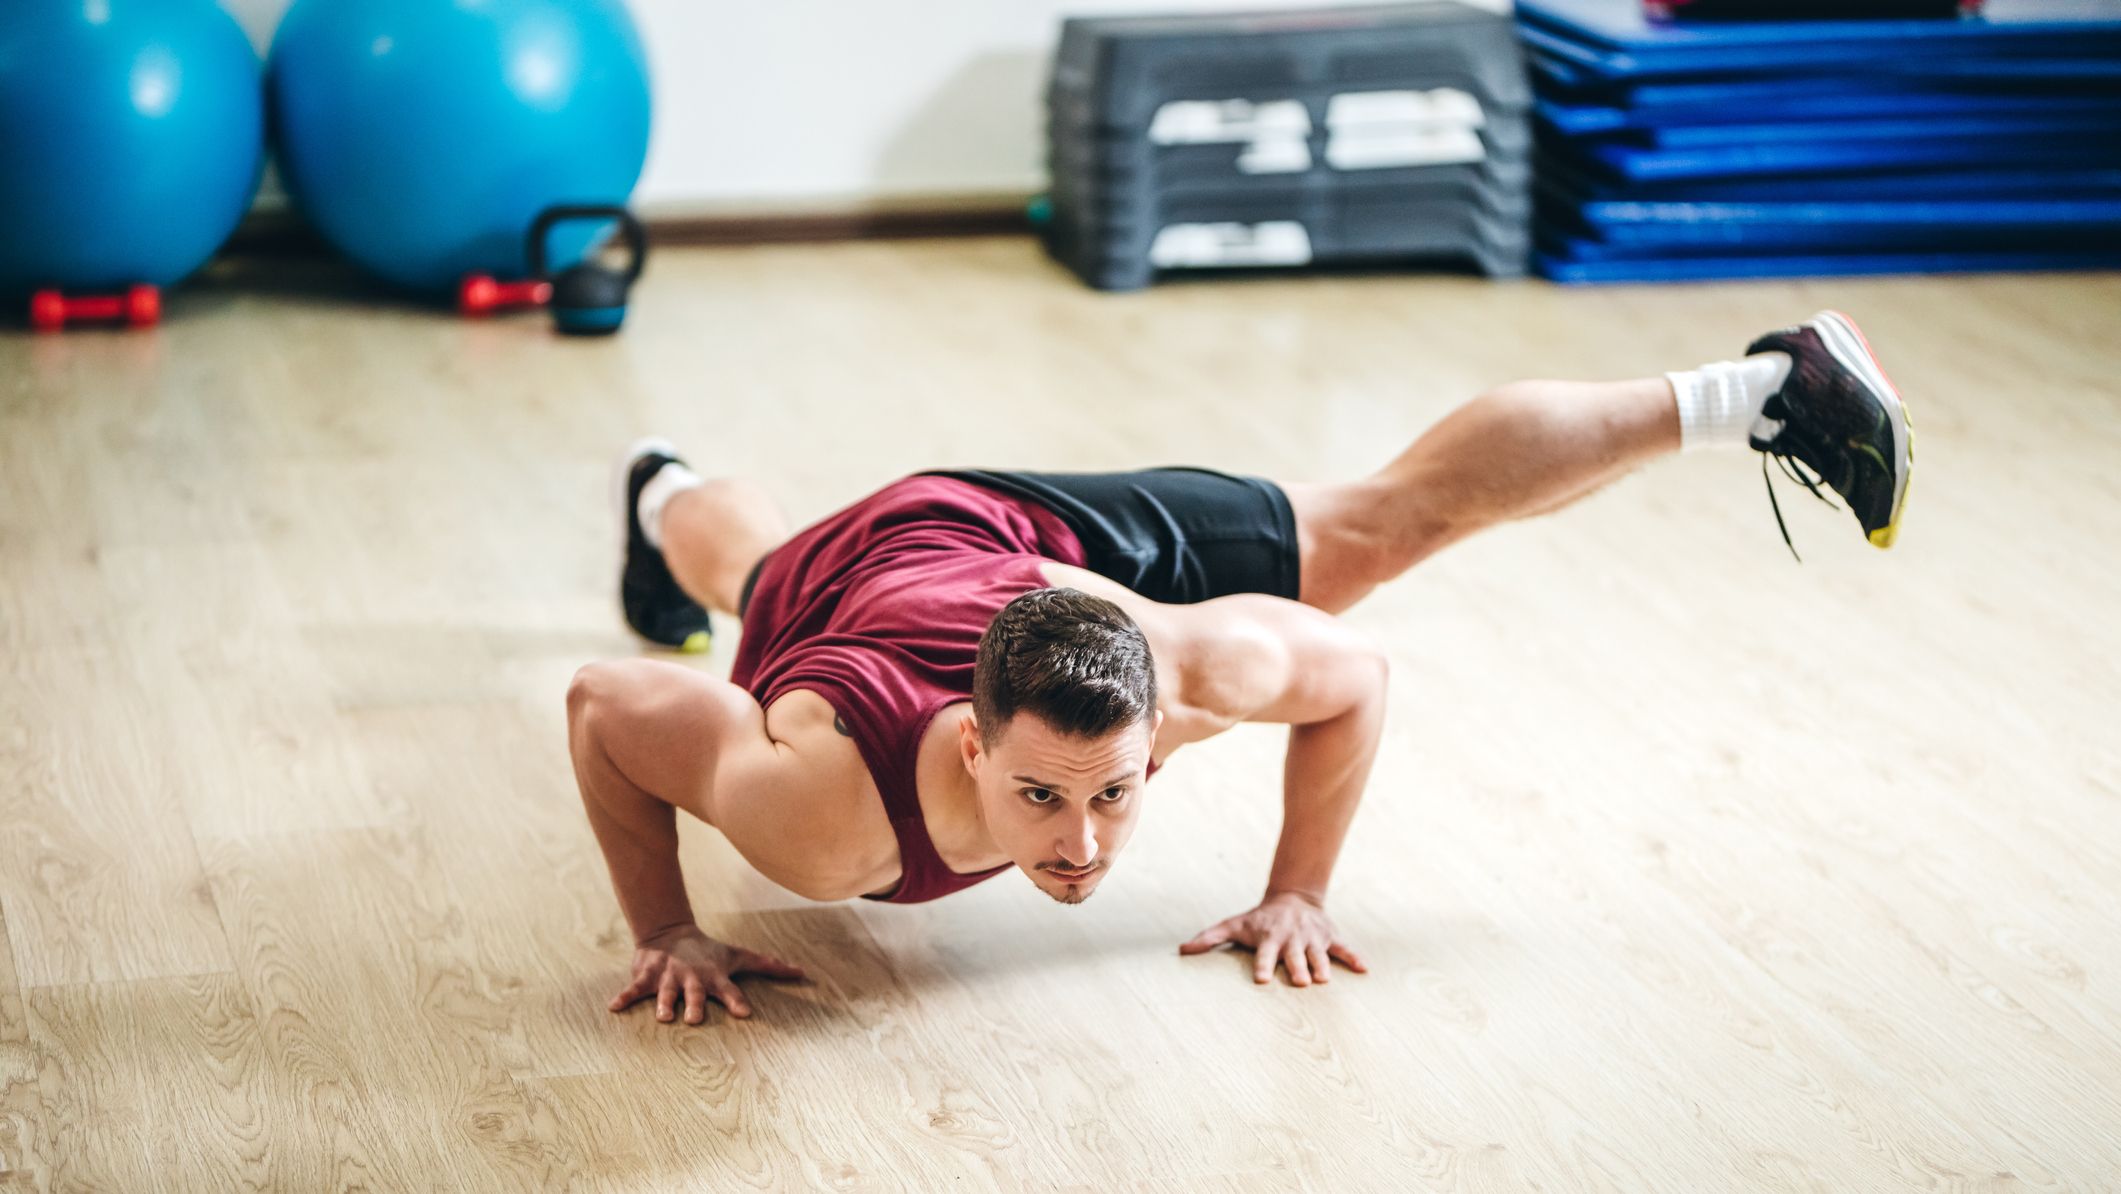 Crawling Exercises For Adults: What Are The Benefits – SWEAT